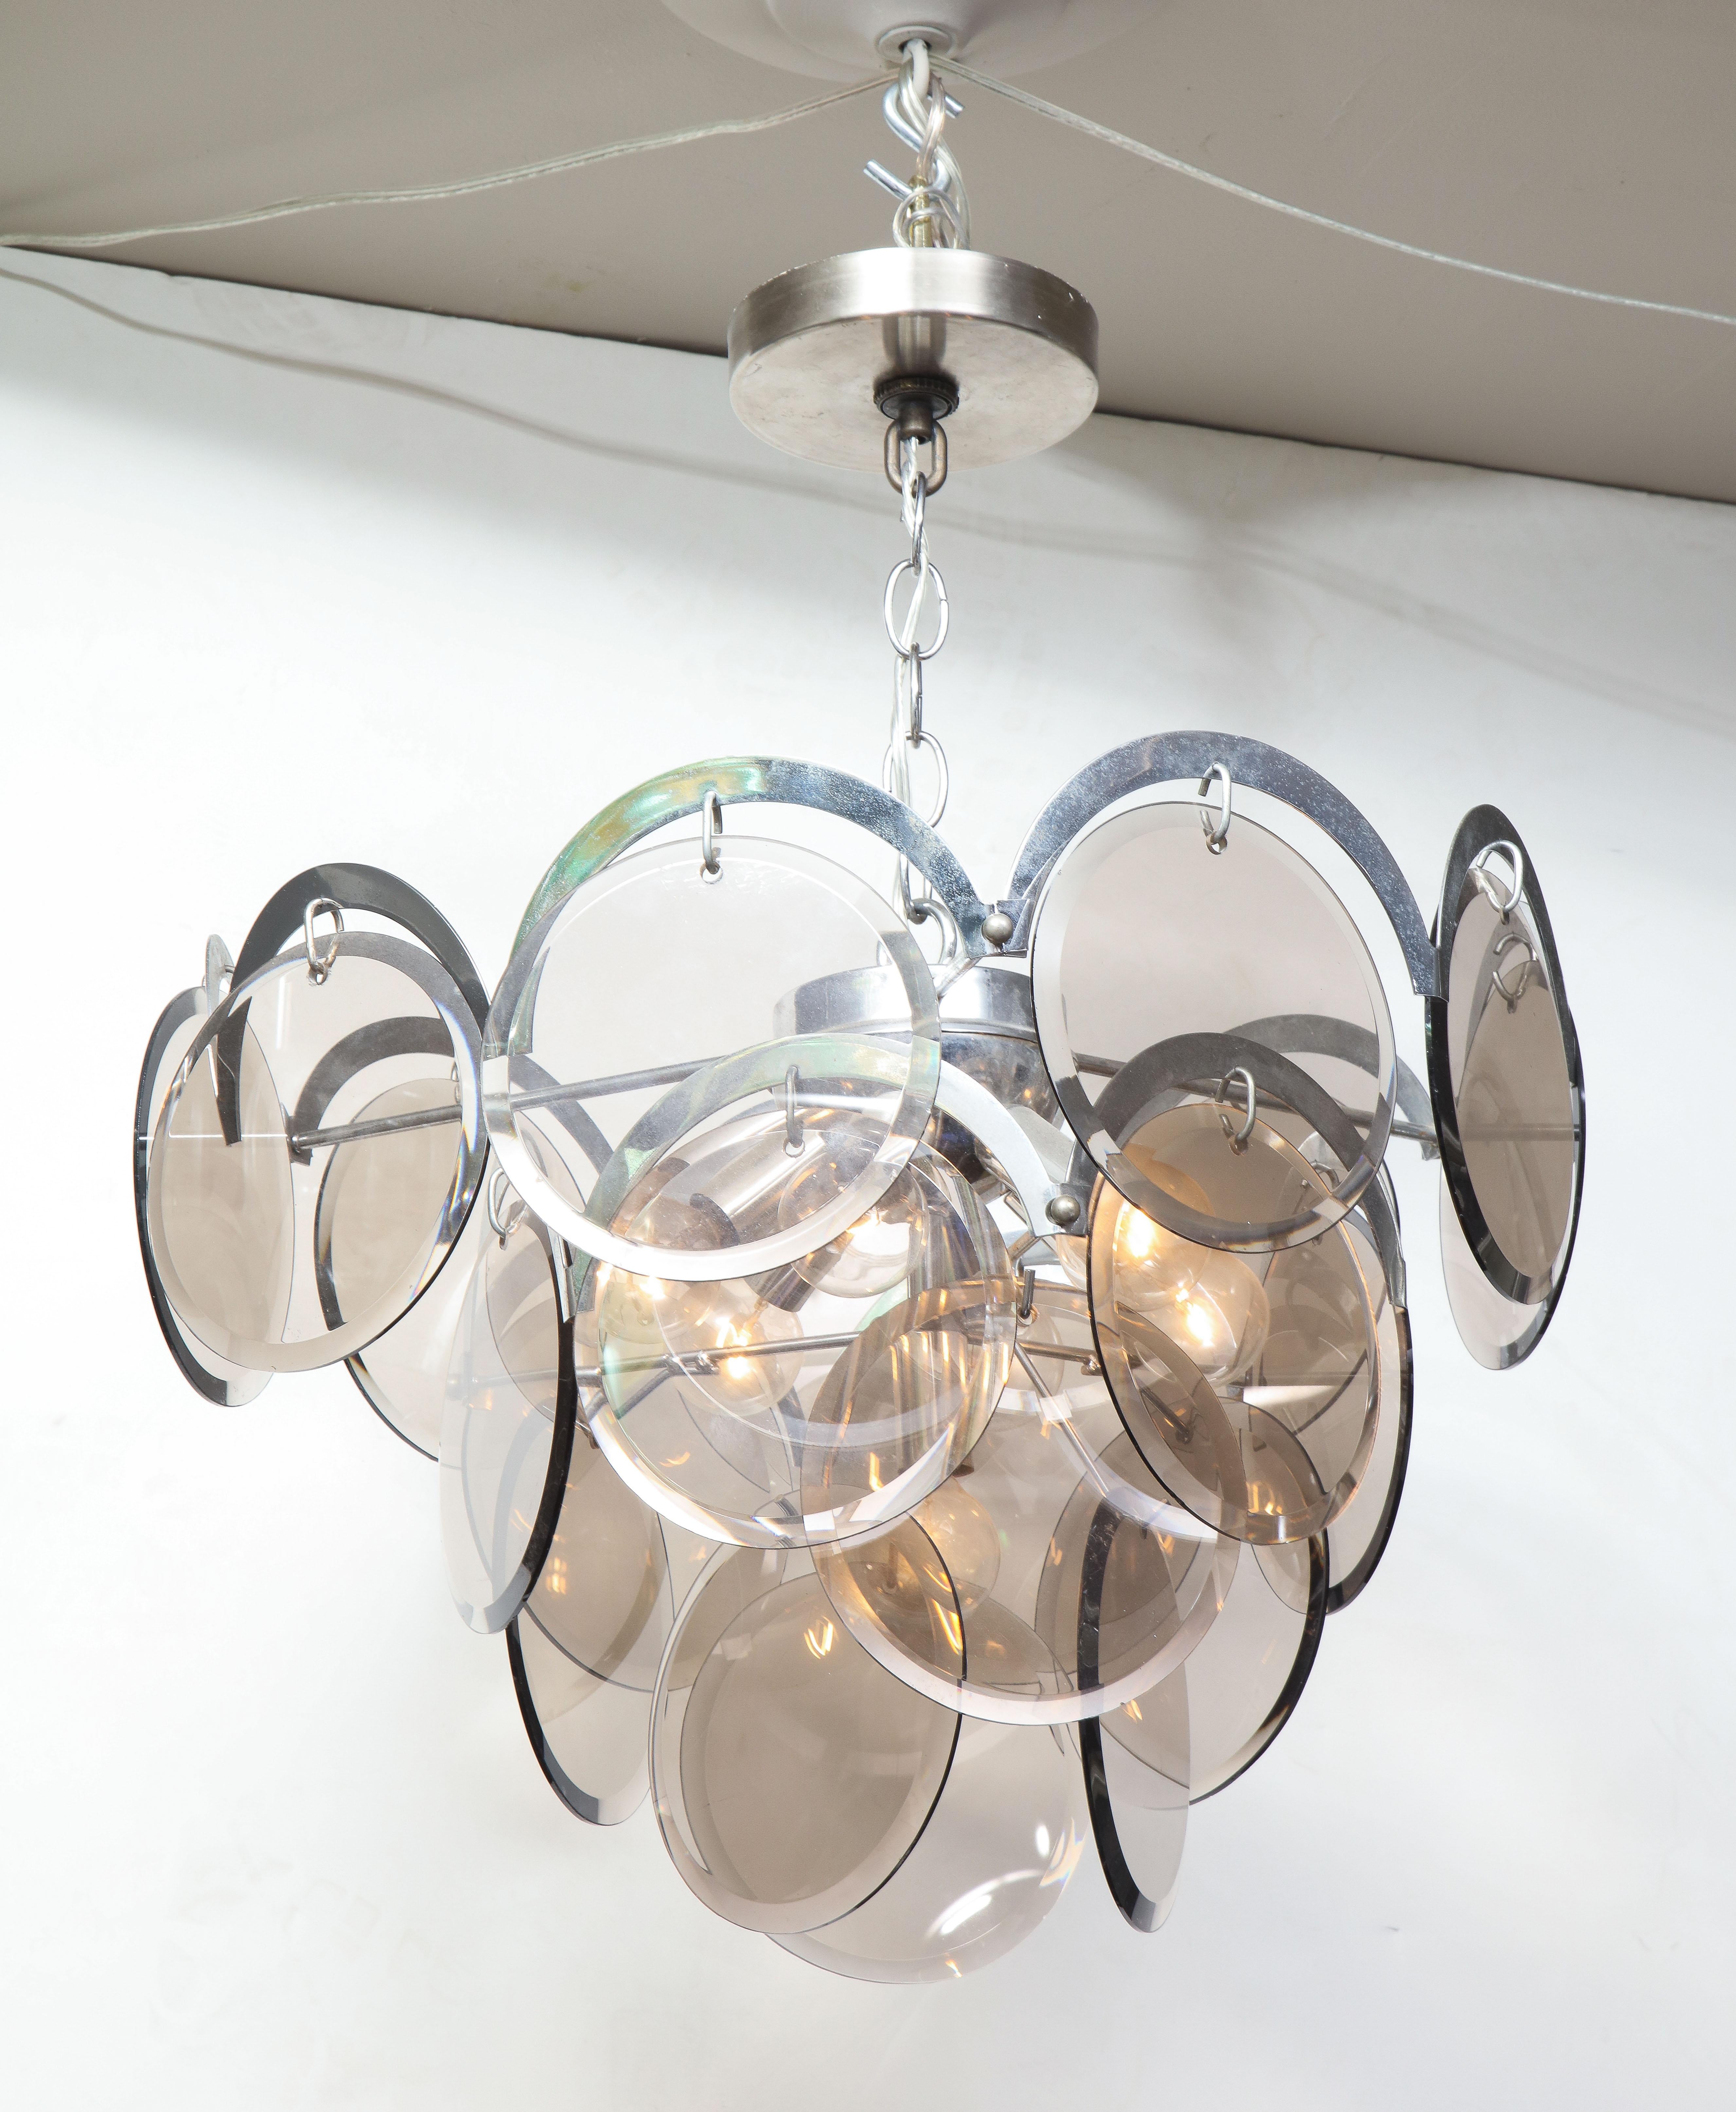 Vintage chandelier is available for purchase immediately. Stainless steel lightly shows signs of aging.